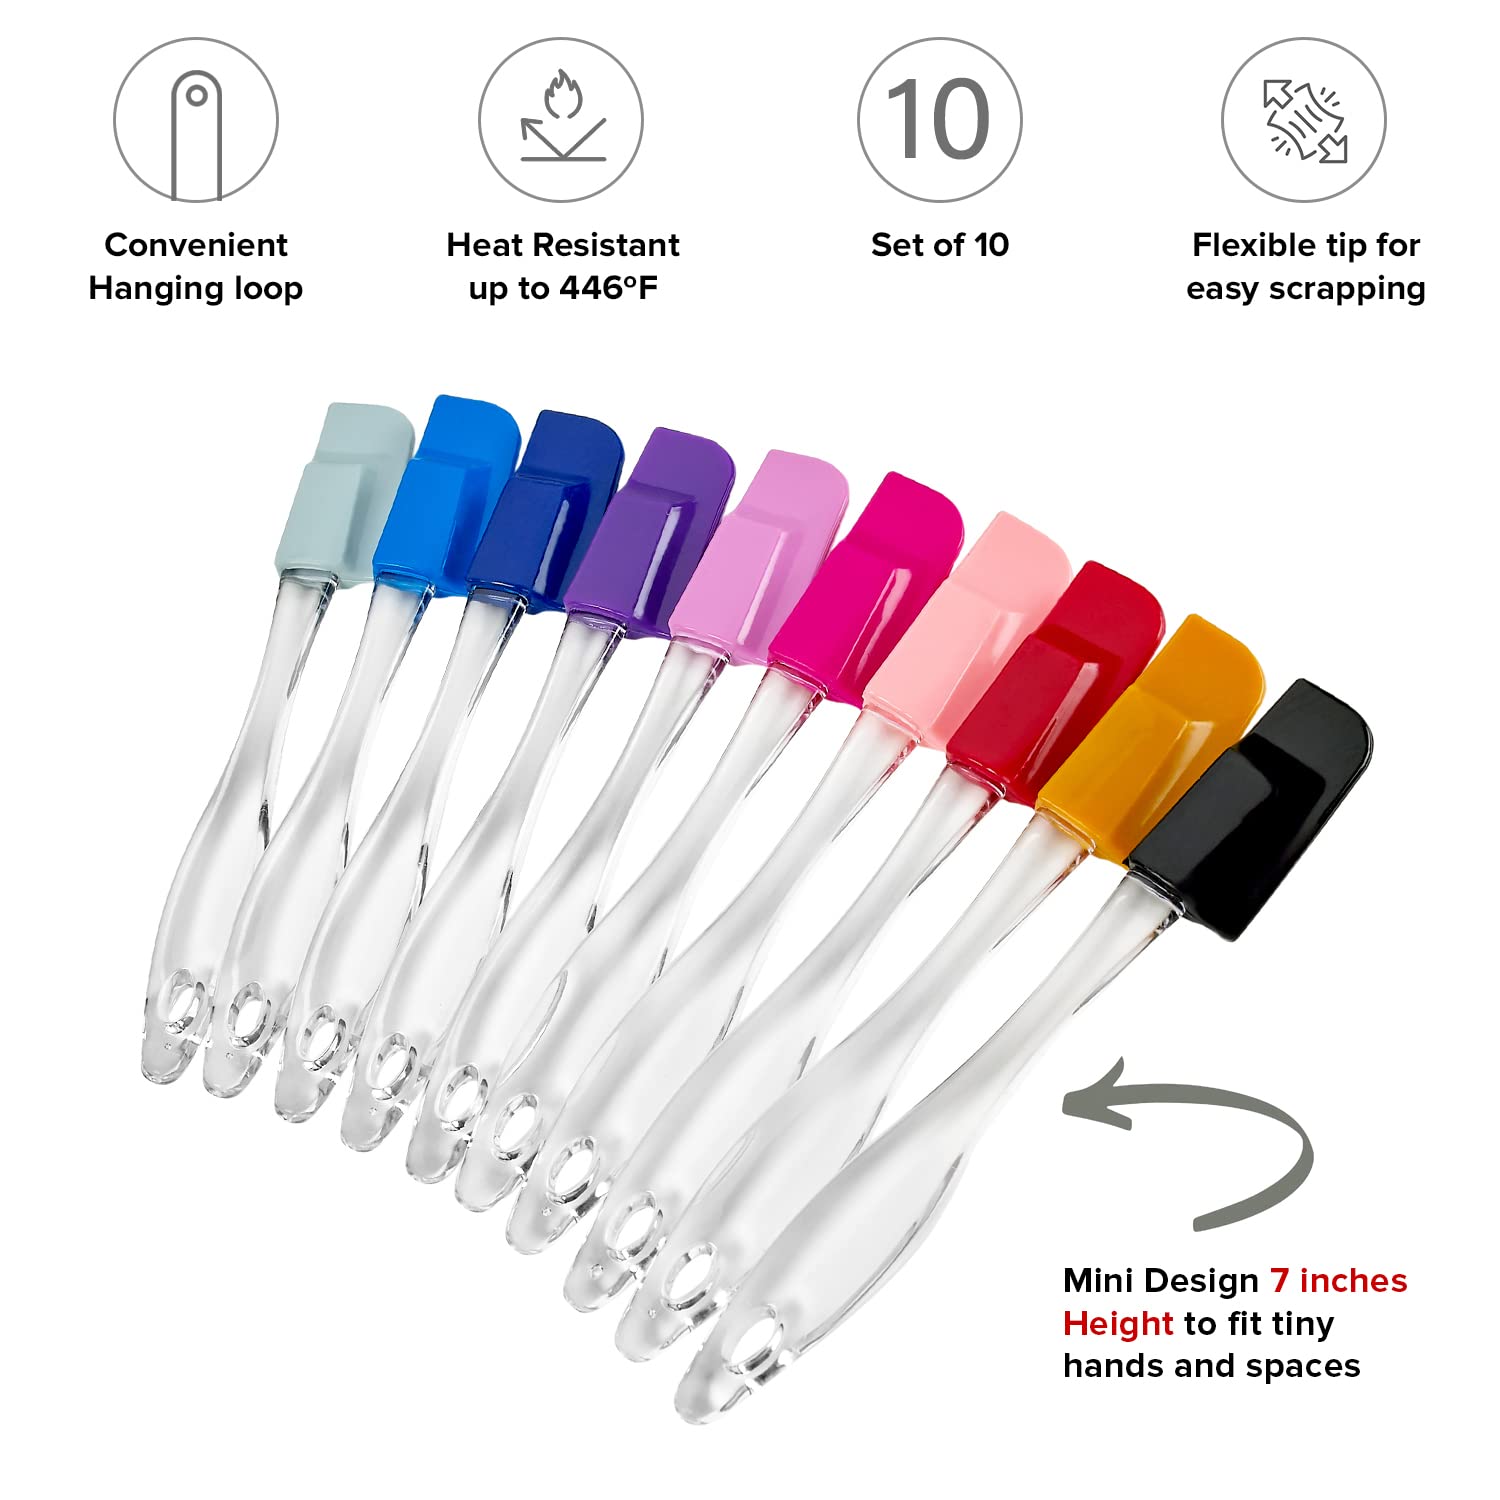 Mini Spatulas Set - 10 Piece Heat Resistant Silicone Spatula - Pro-Grade Multipurpose Kitchen Tool for Baking, Cooking, Mixing, and More - Non-Stick, Dishwasher Safe Bright and Colorful Small Spatula  - Like New